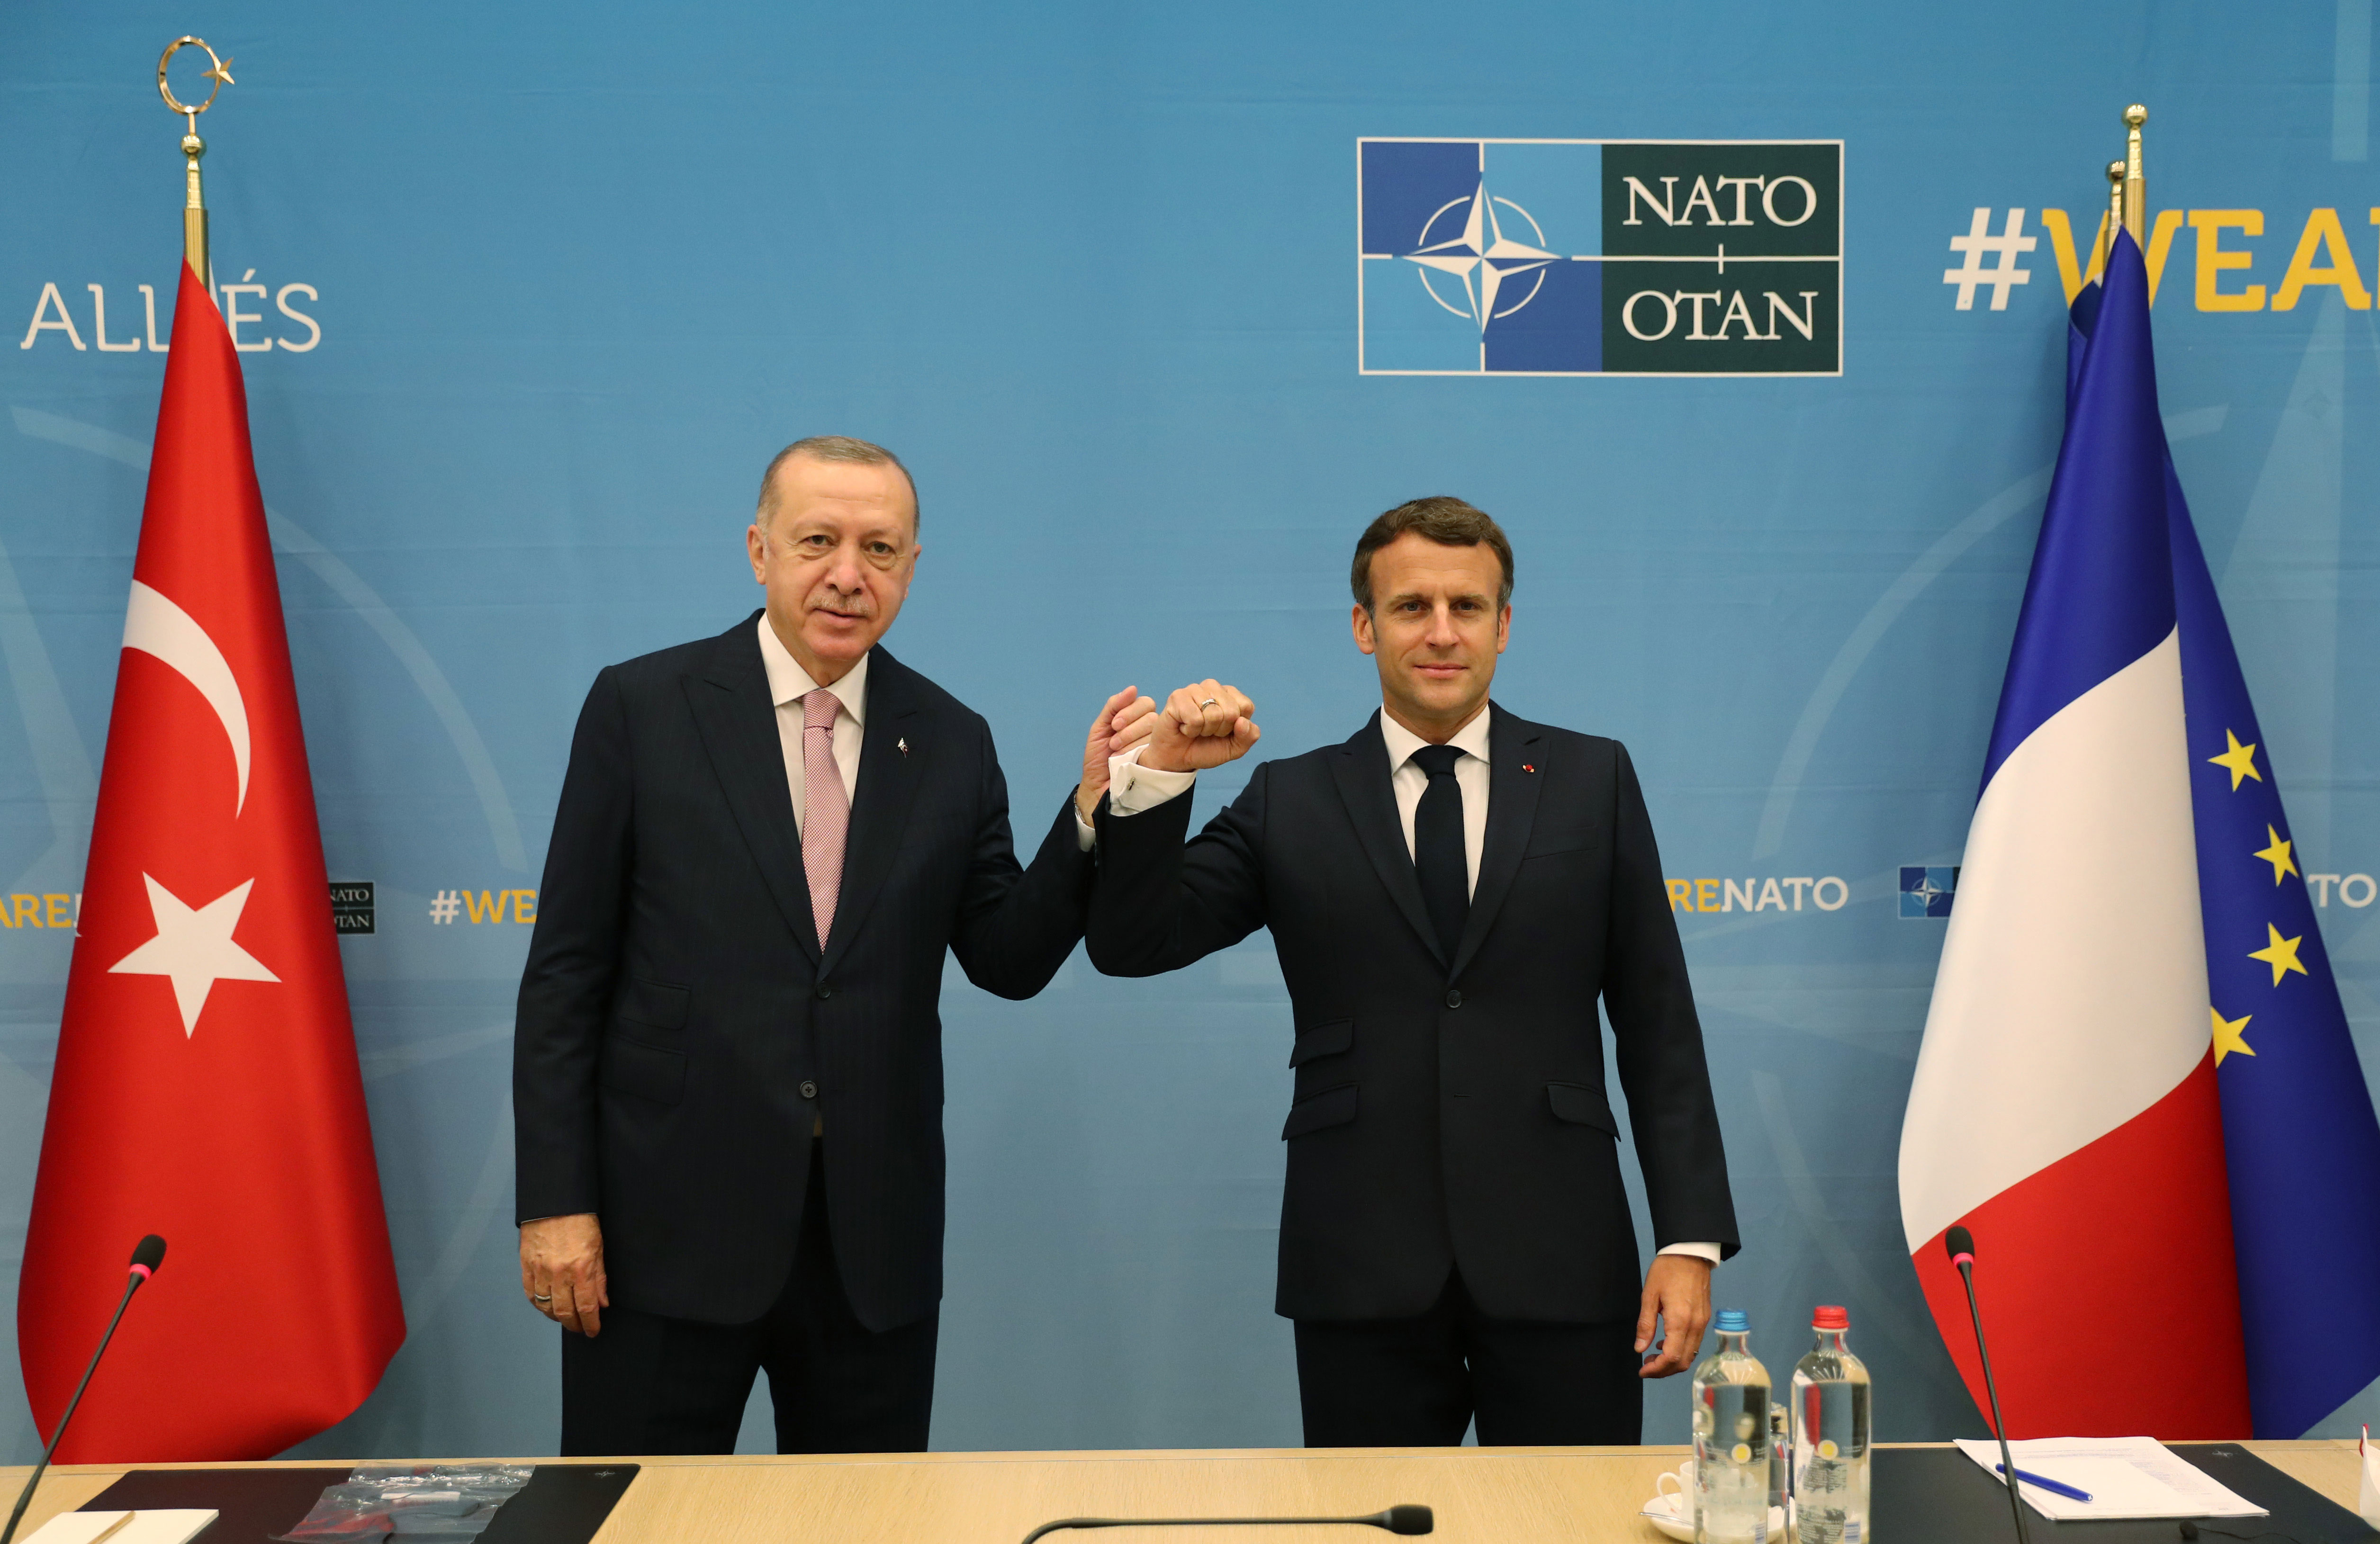 Turkish President Recep Tayyip Erdogan, left, greets French President Emmanuel Macron during their meeting within the NATO summit in Brussels, Belgium, on June 14.